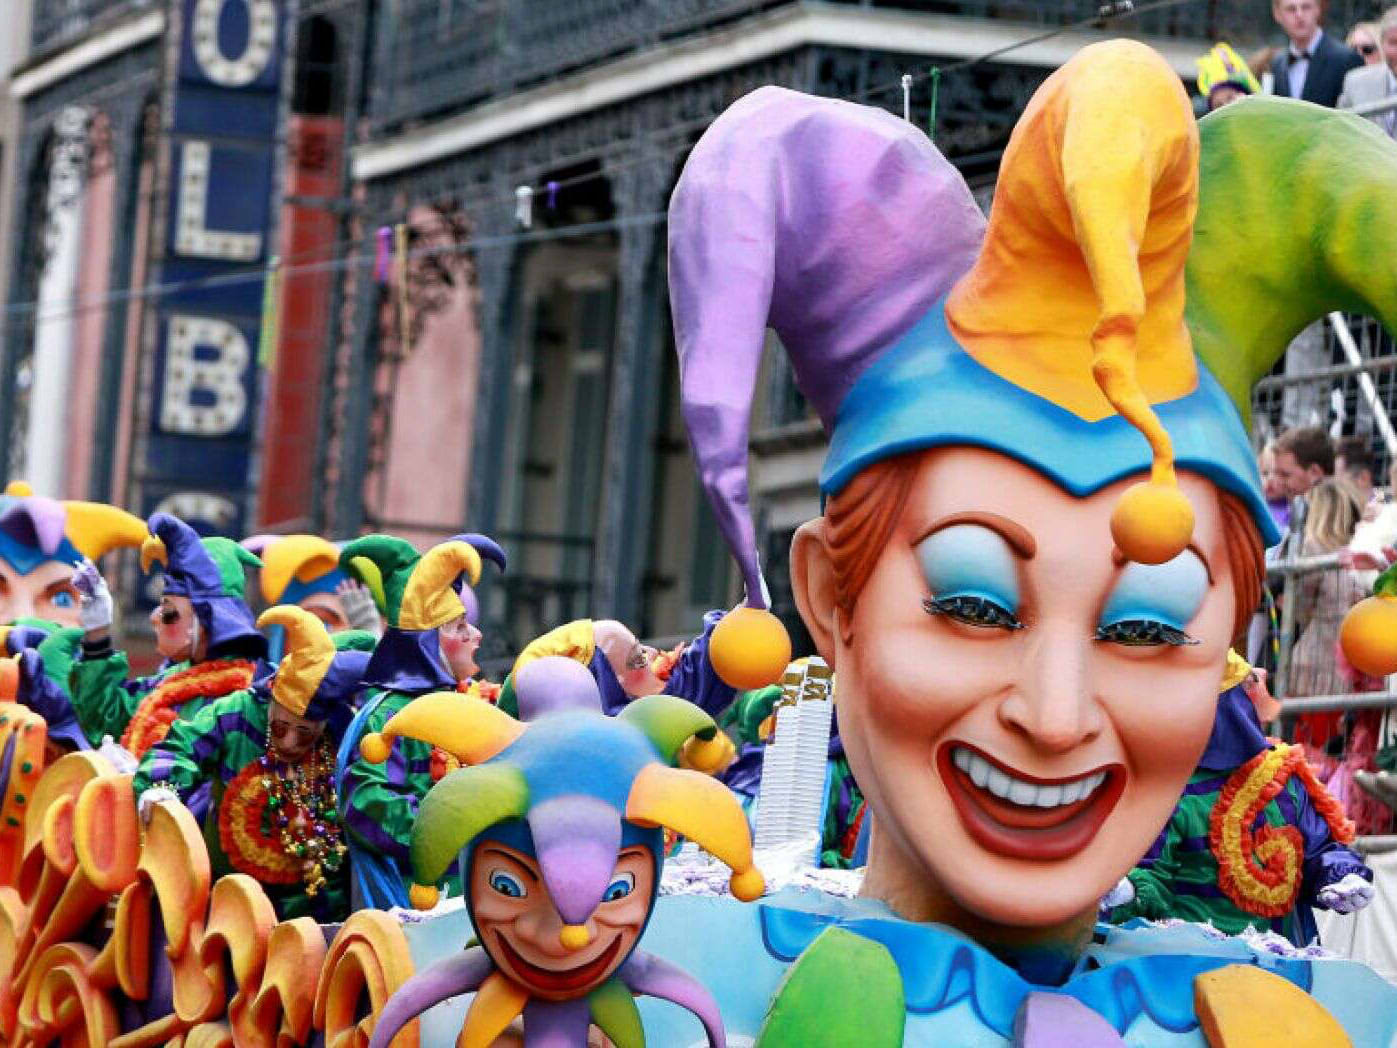 Mardi Gras in New Orleans: 10 do's and don'ts for tourists looking to celebrate like a local